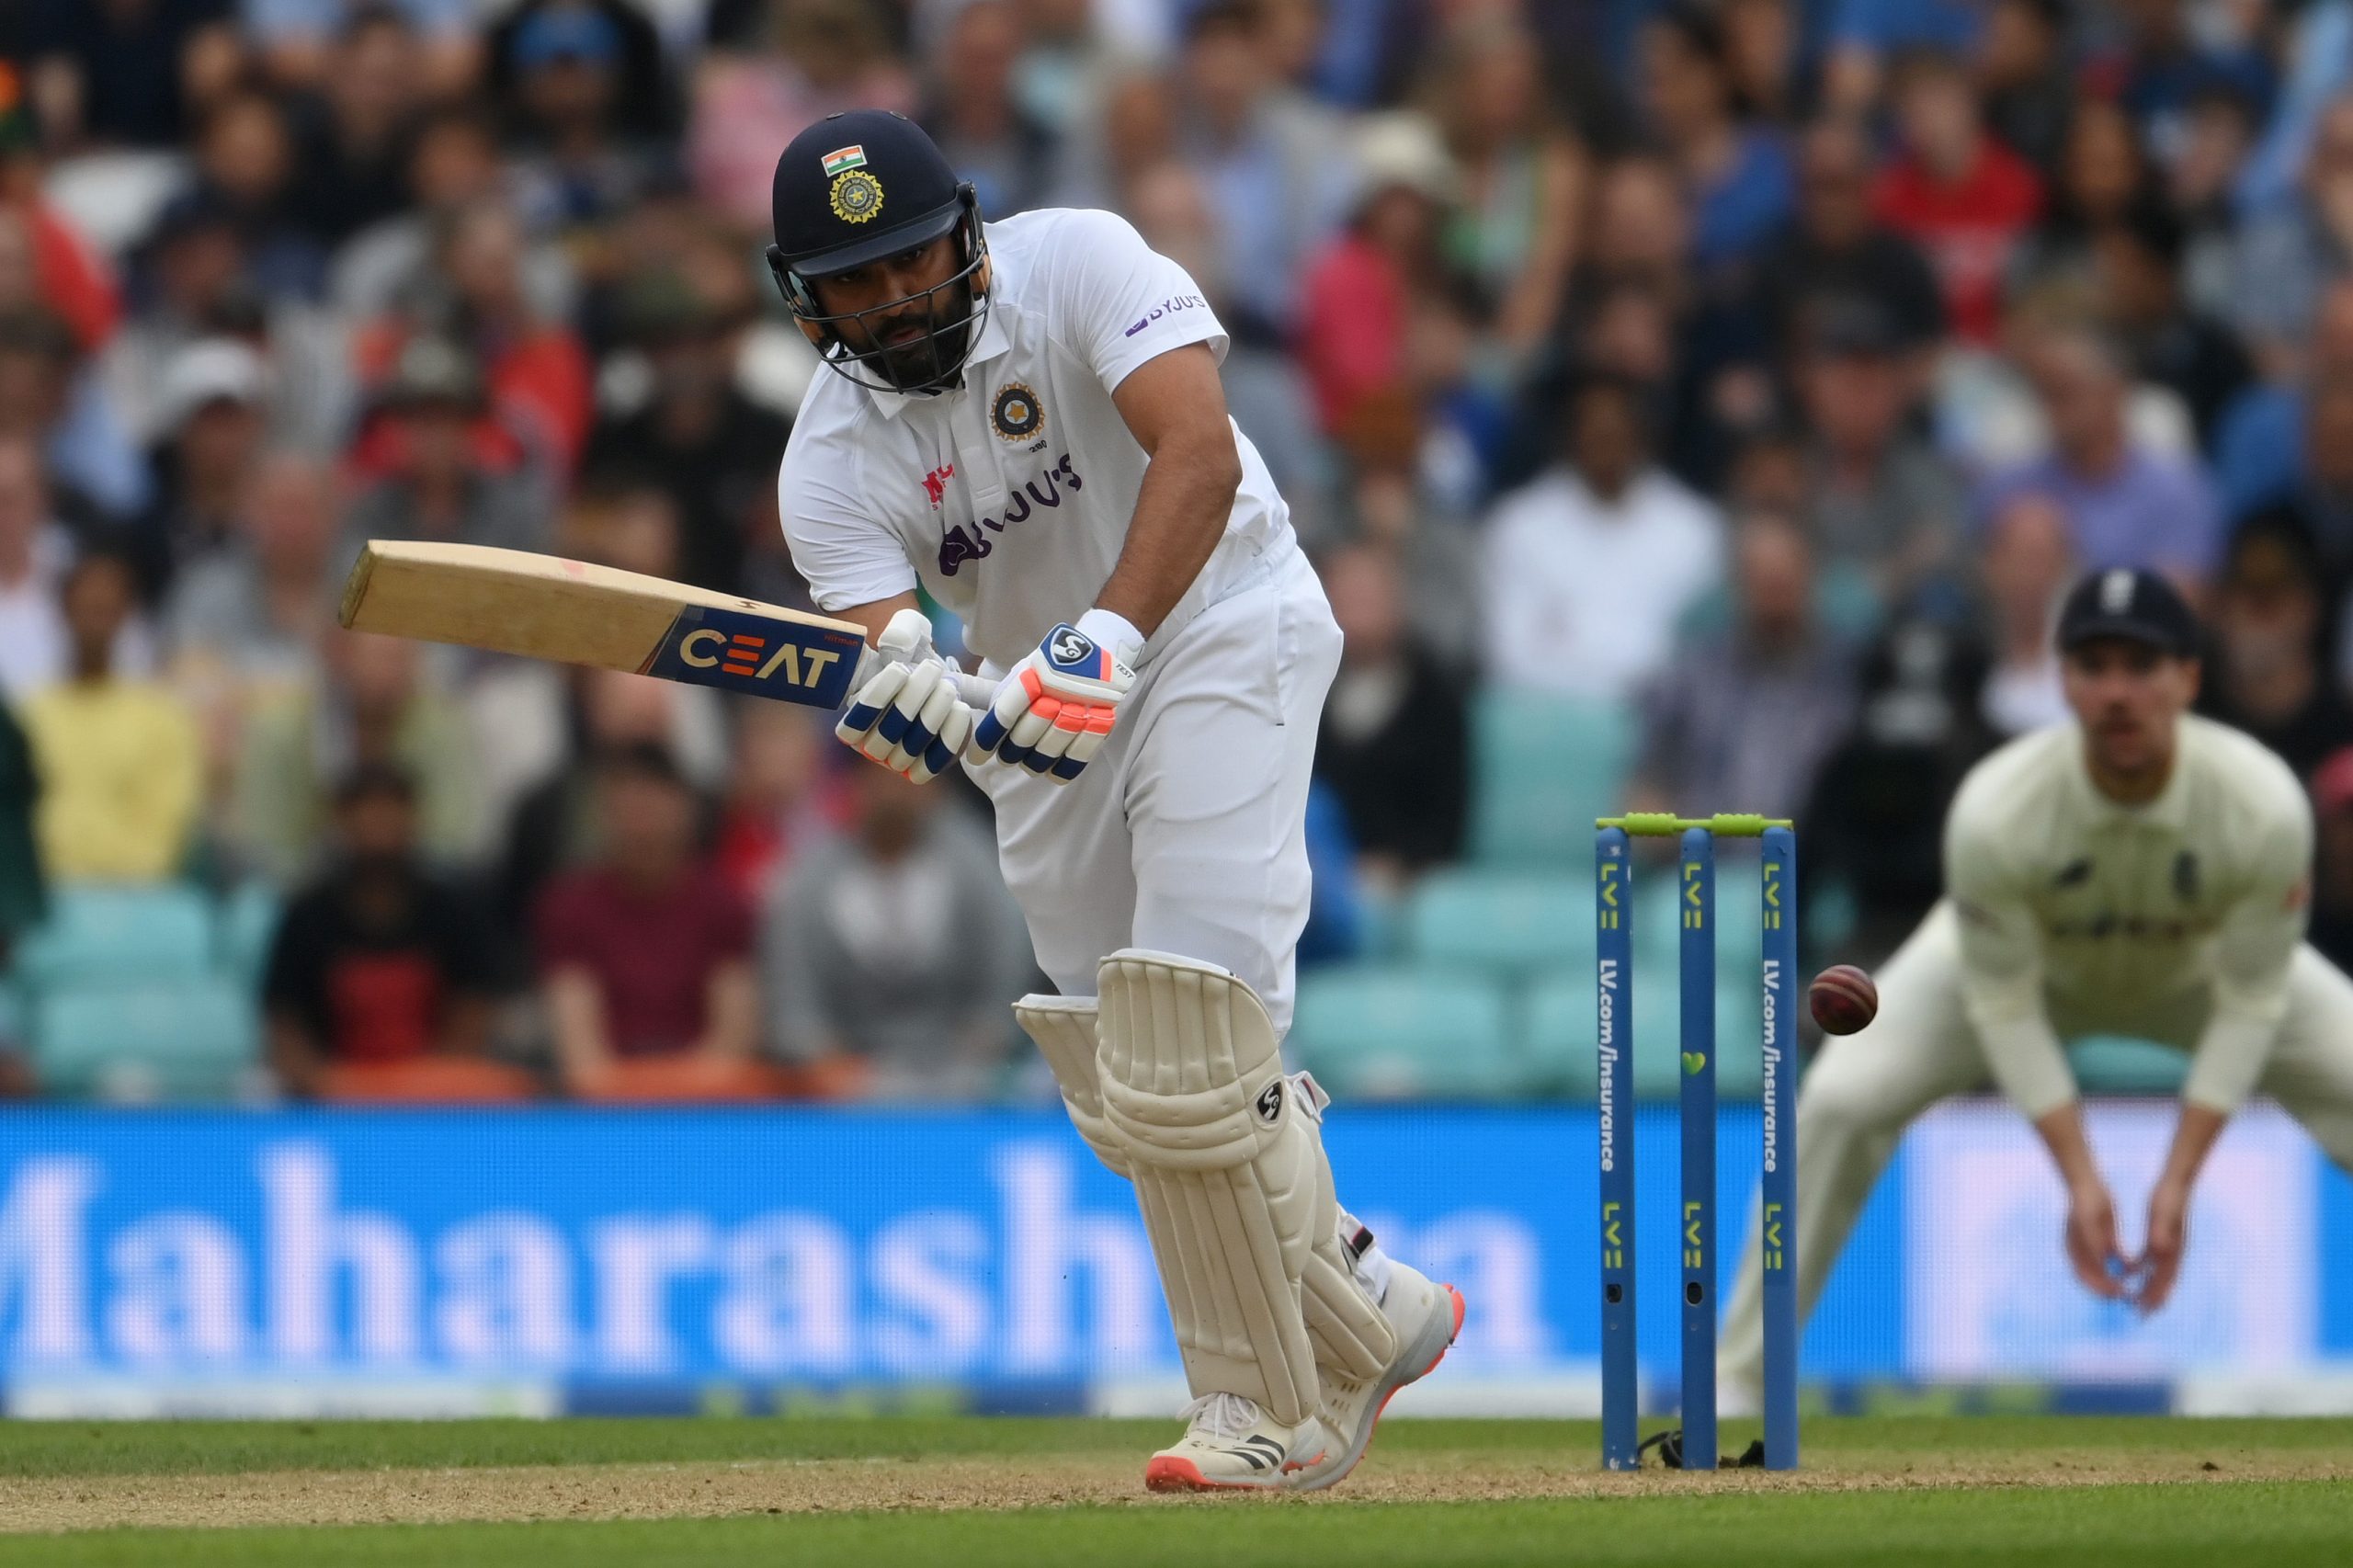 4th Test: Rohit Sharma brings up eighth Test century, first away from home